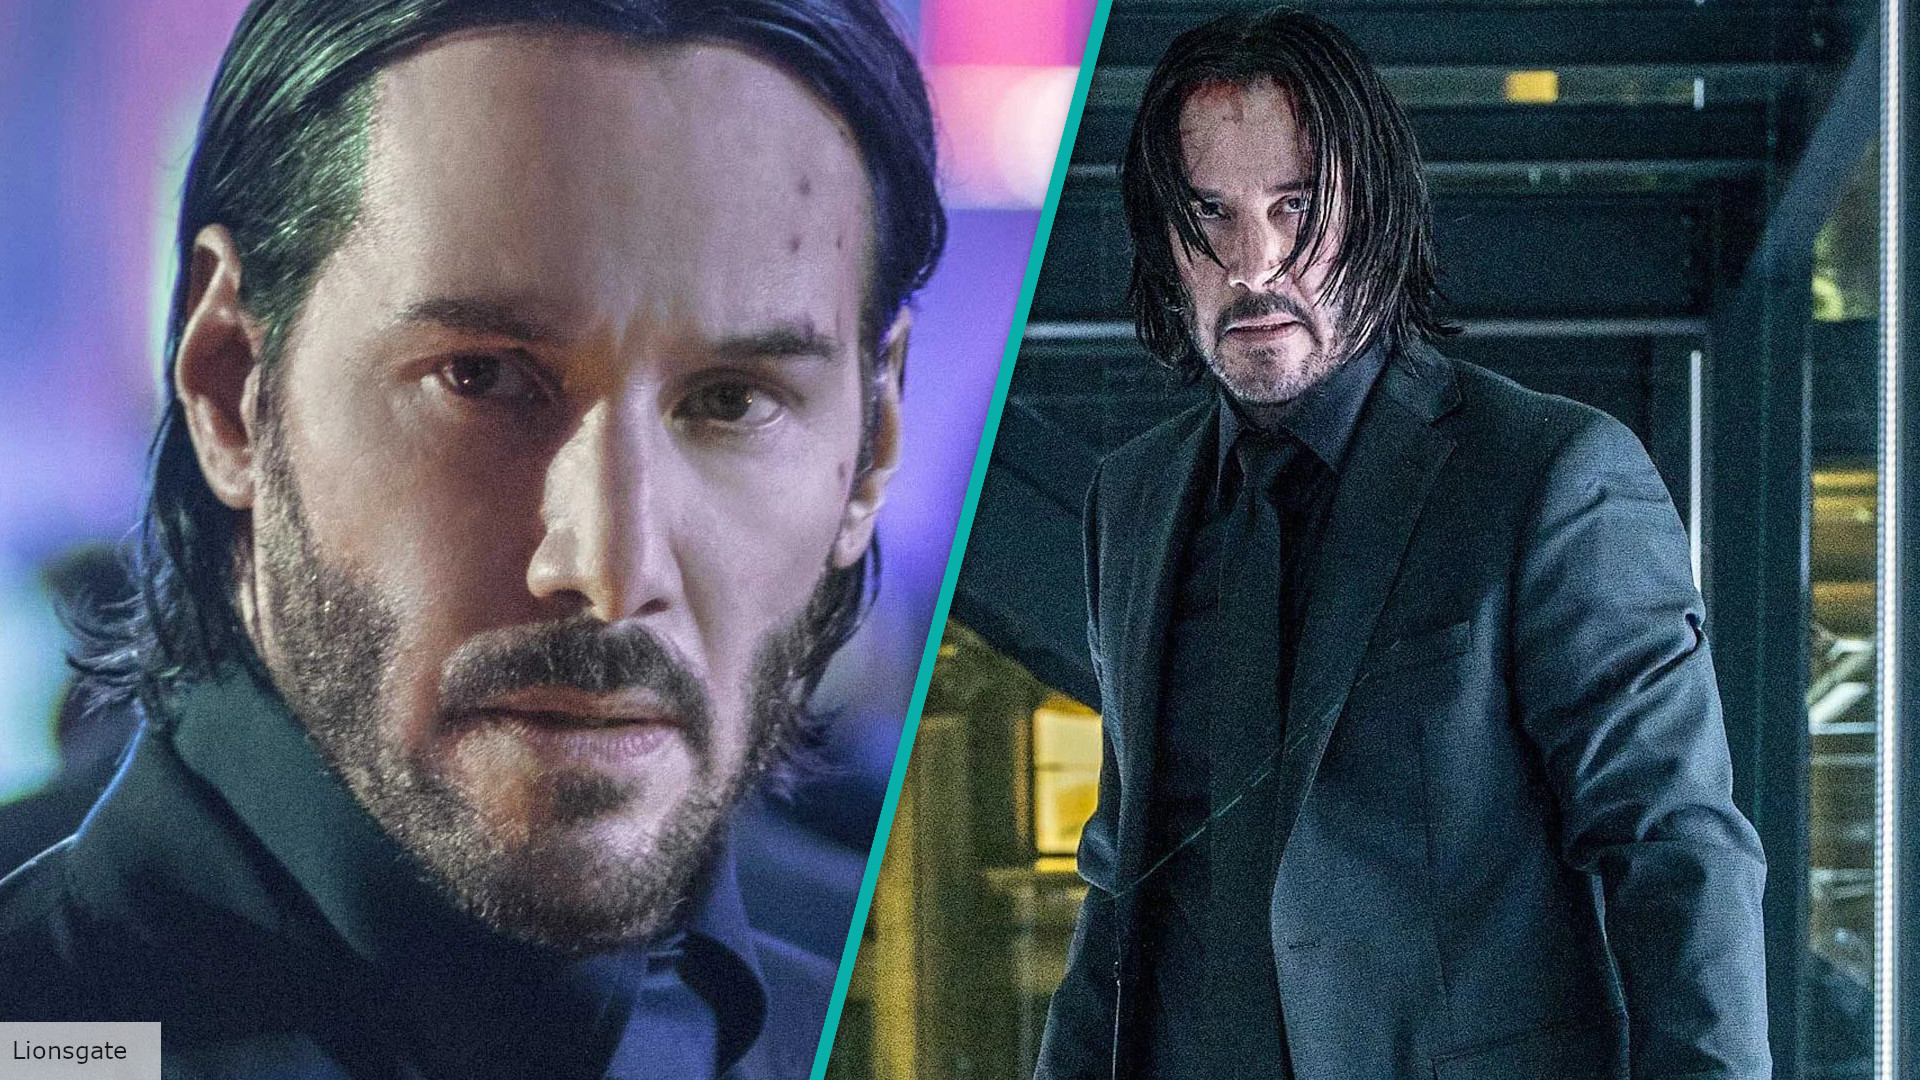 John Wick 4 is “a bit of a conclusion”, says director